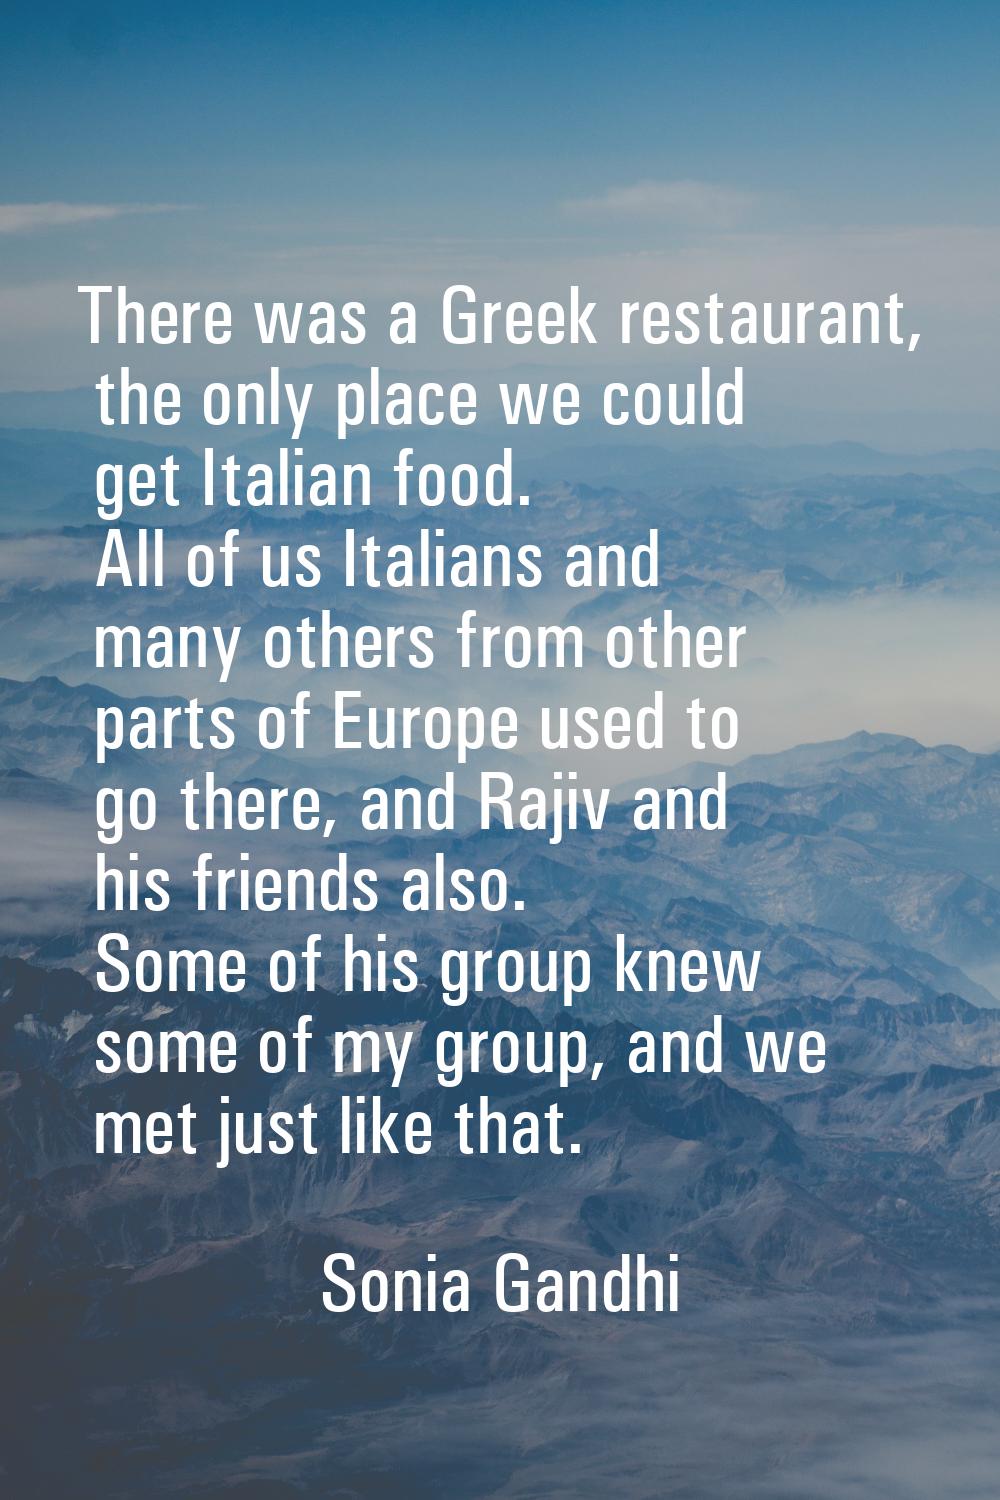 There was a Greek restaurant, the only place we could get Italian food. All of us Italians and many